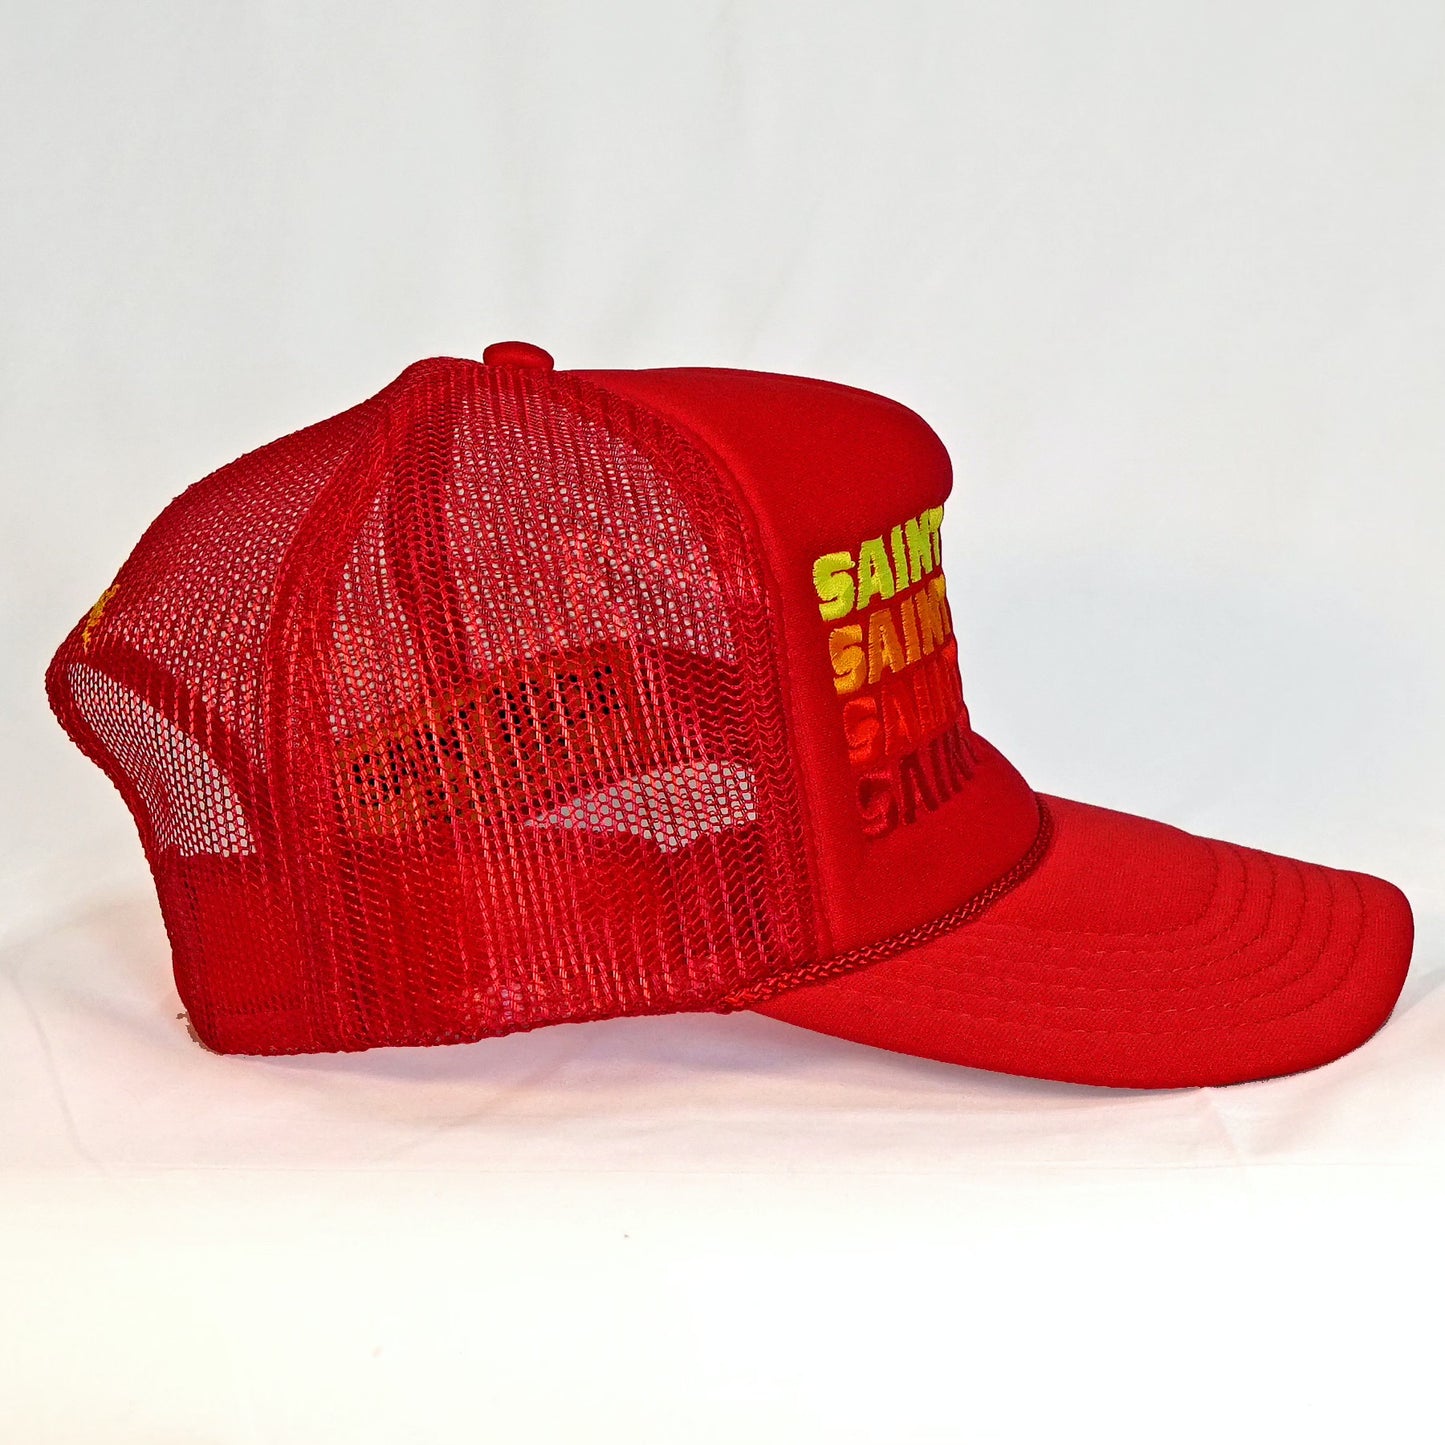 REPEAT TRUCKER - RED